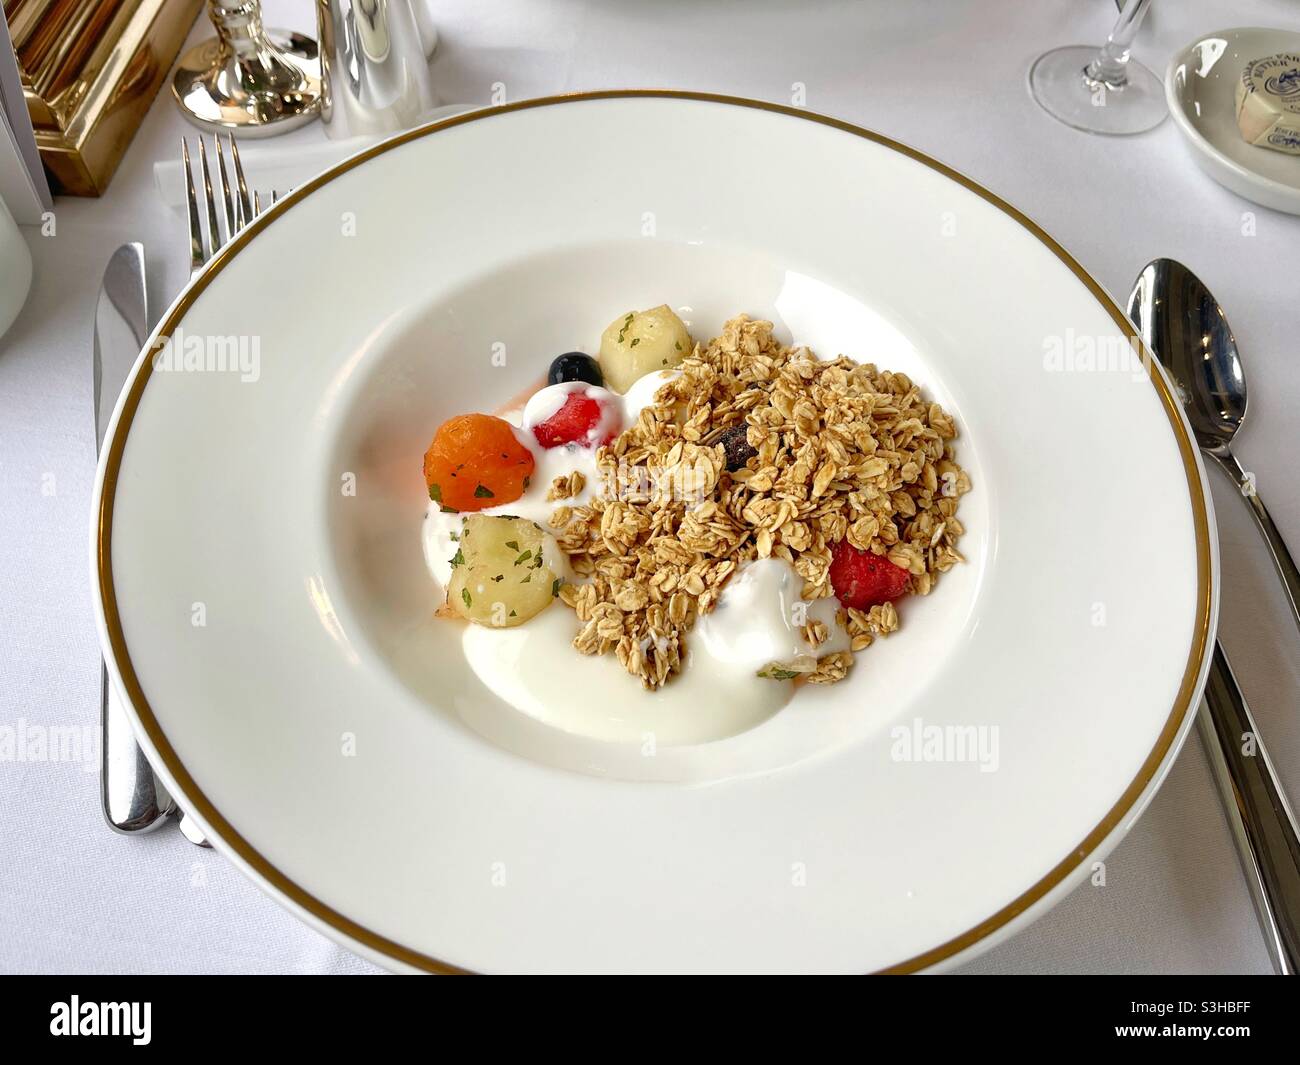 Trio of melon with oats and yoghurt in a large white dish on a table setting Stock Photo